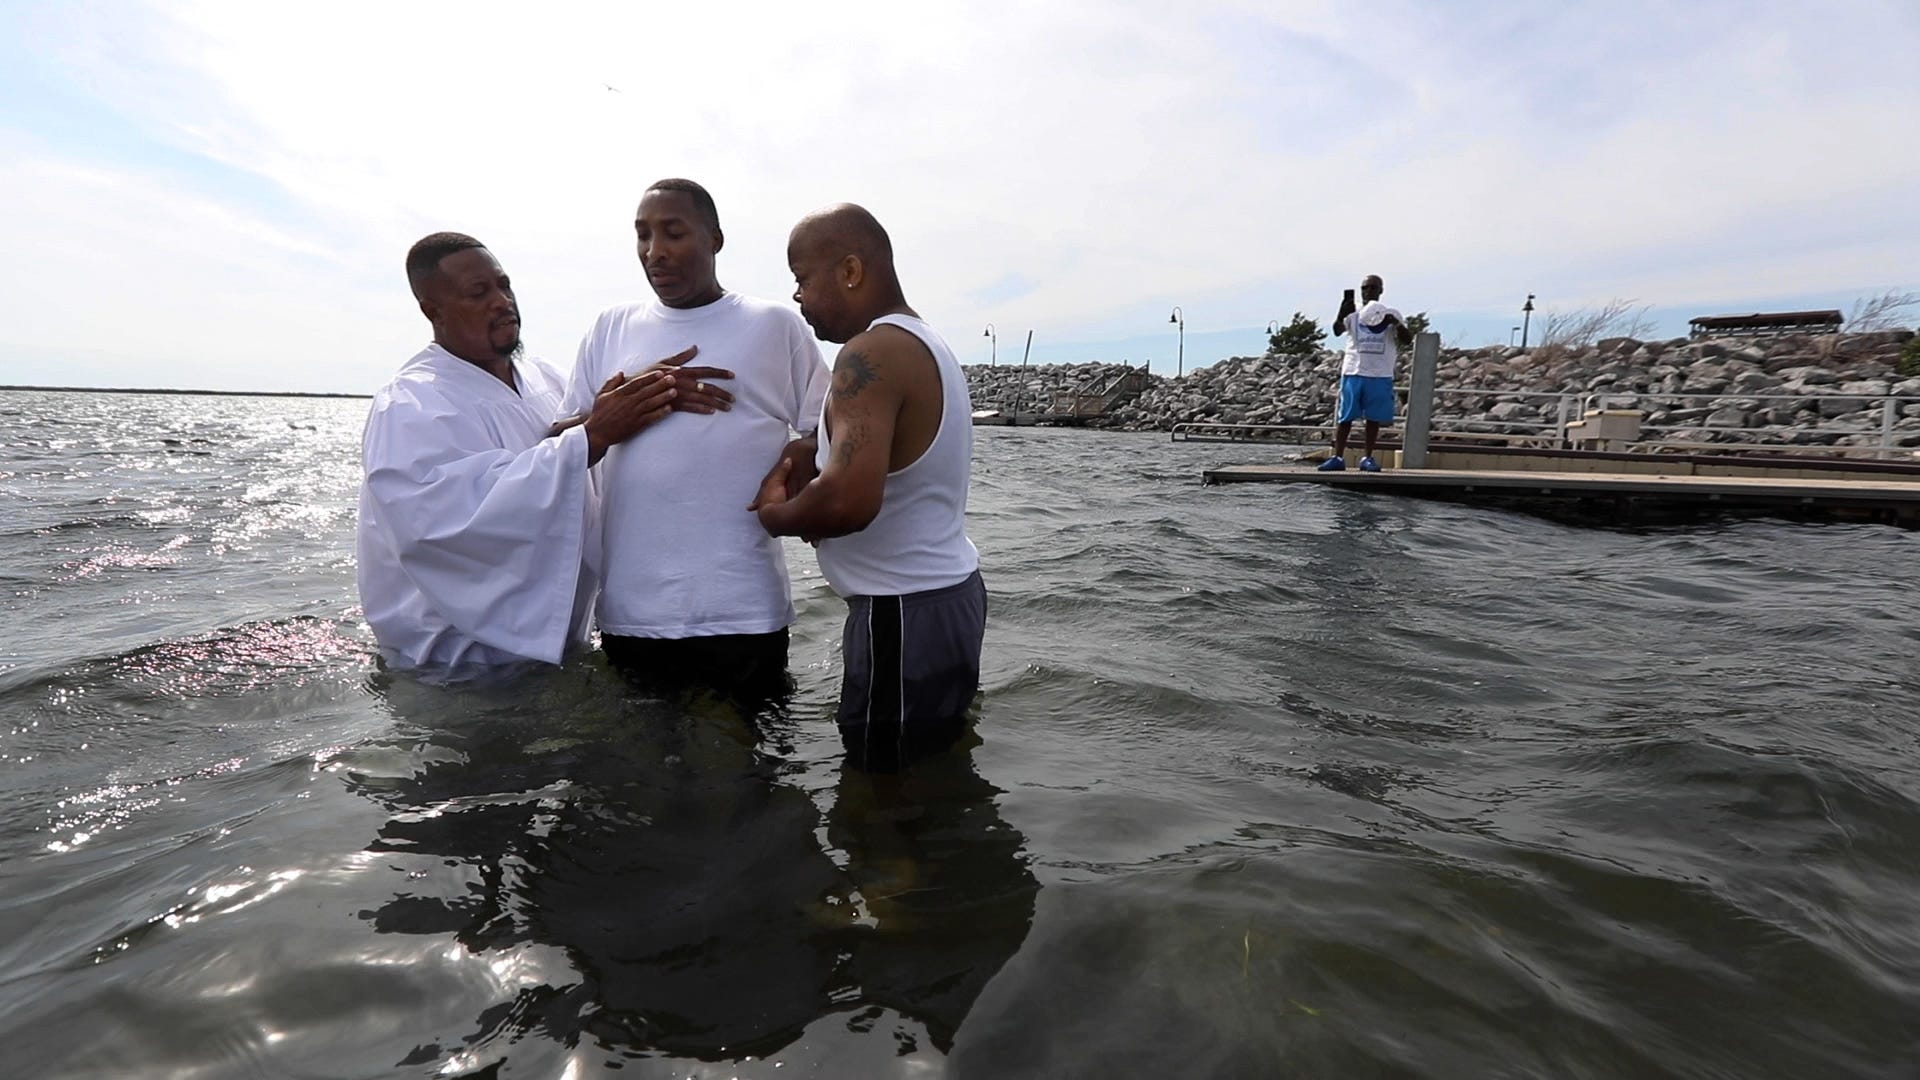 Pastor Kenneth Simmons of Cold Spring Bible Chapel, with help from church member Guy Capps, baptizes Lee Lemon in Lake Erie at Buffalo Harbor State Park in Buffalo, N.Y., on Saturday, July 23, 2022. The church holds a baptism after their annual picnic.